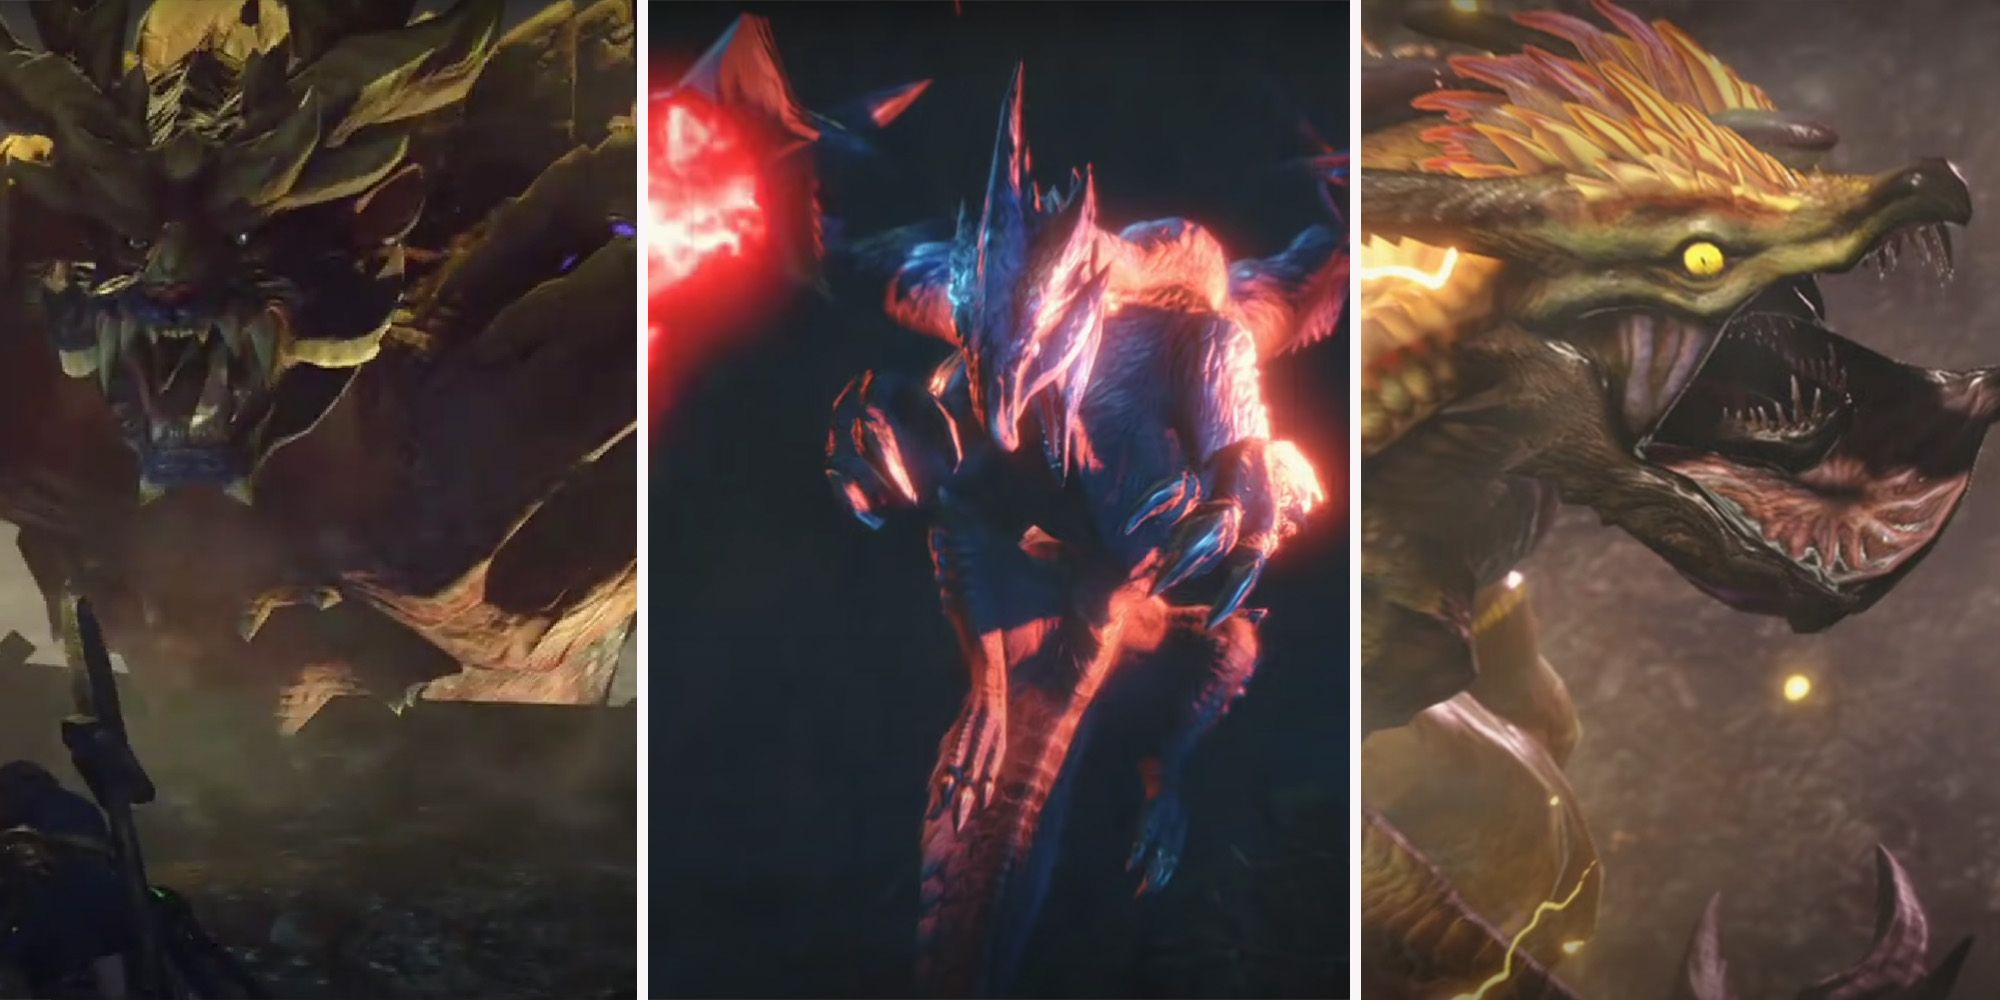 Strongest Monsters from Monster Hunter Rise Feature Image featuring Allmother Narwa, Magnamalo, and Crimson Glow Valstrax